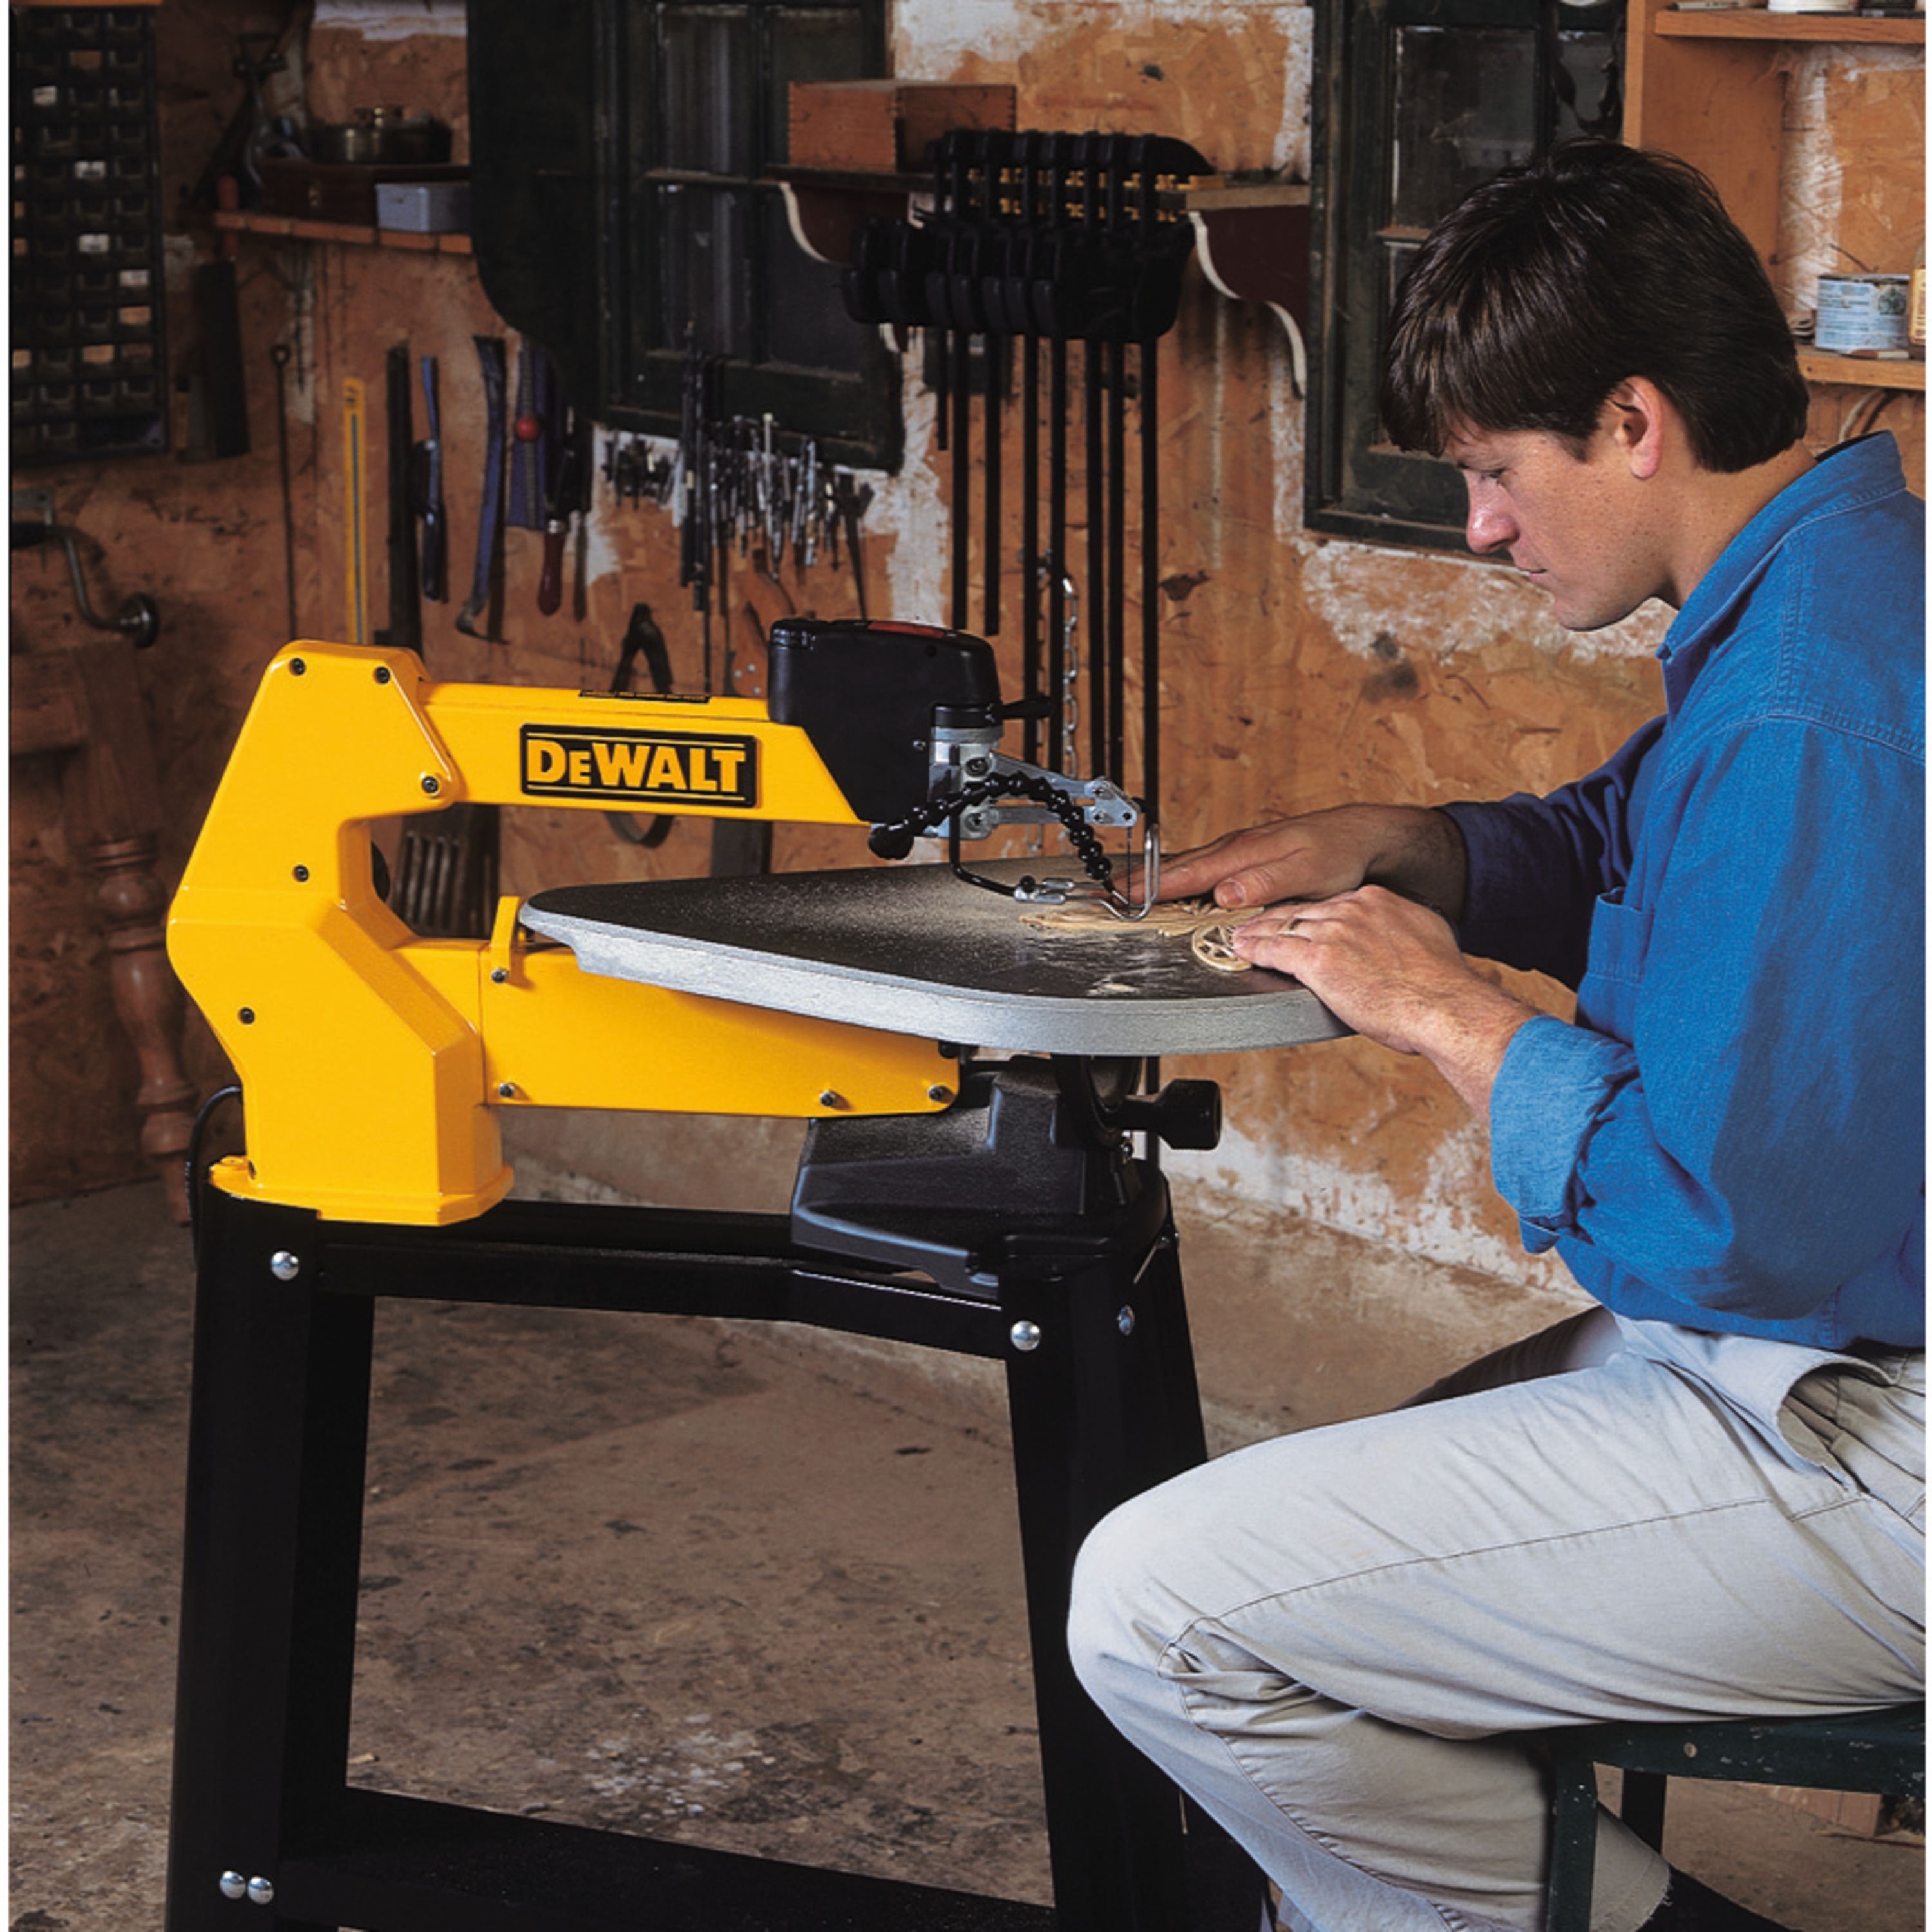 20 inch Variable Speed Scroll Saw being used by person.